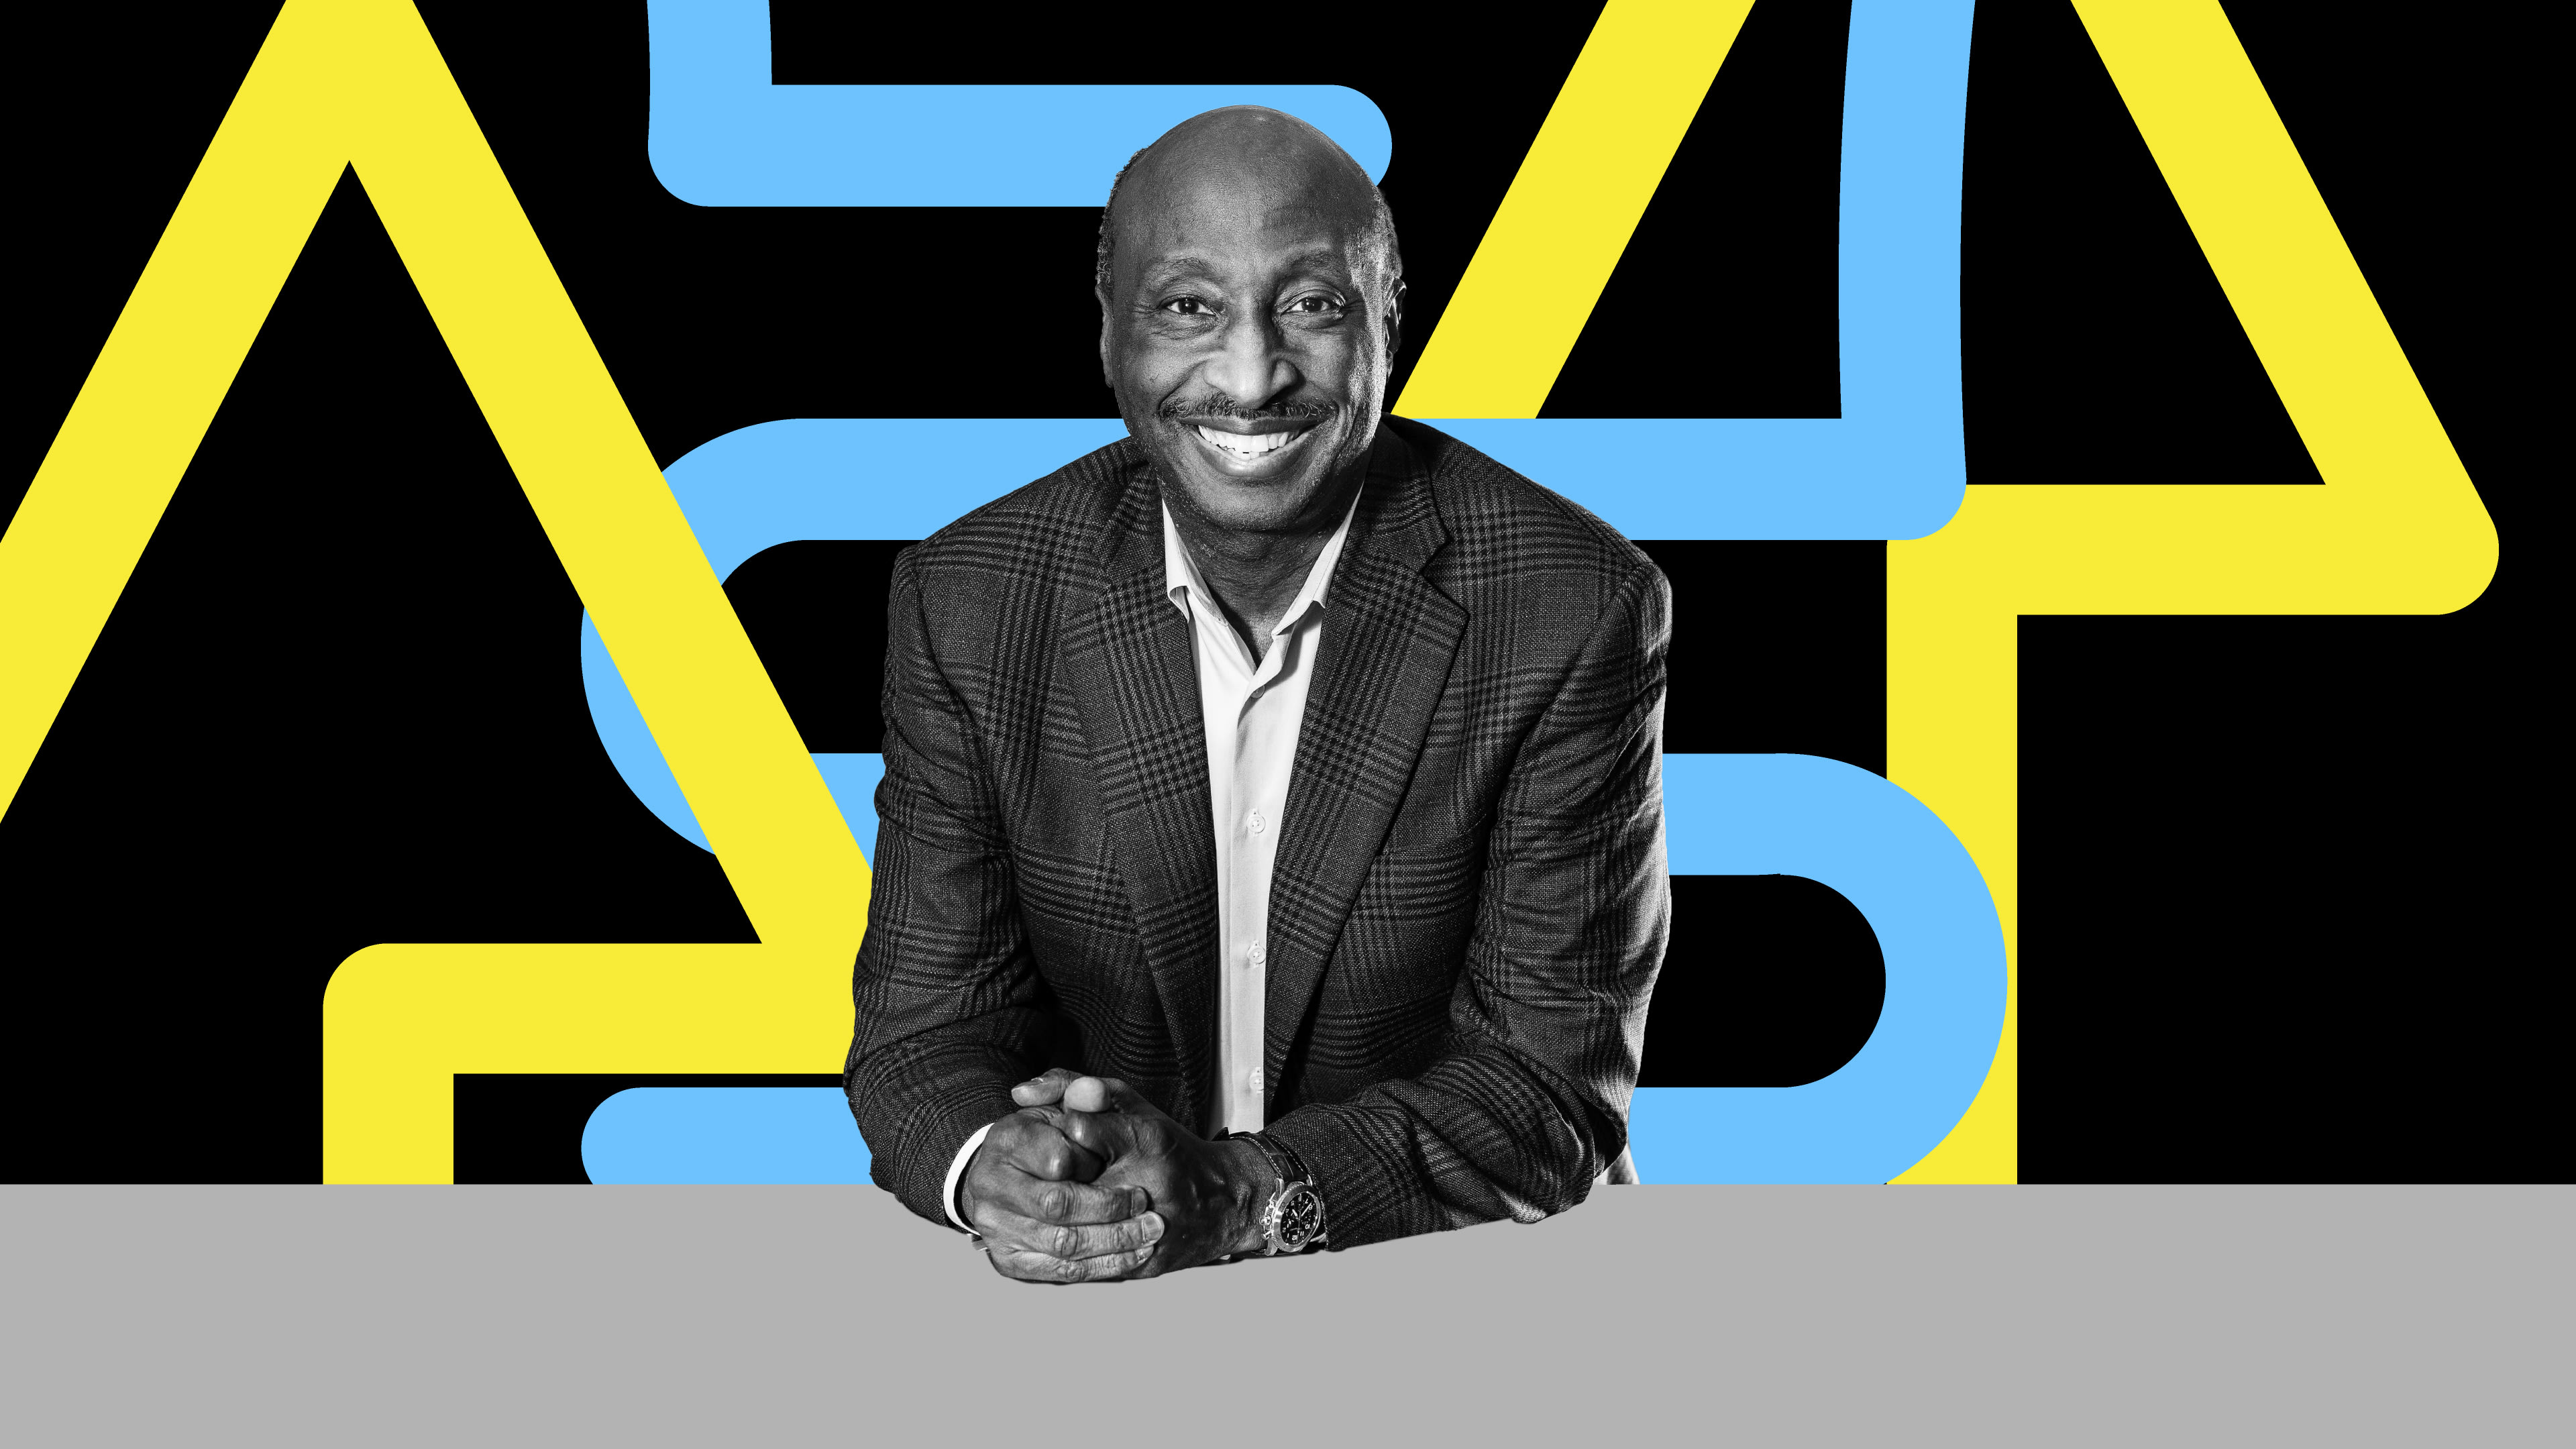 The key to leadership? Kenneth Frazier says it’s all about adopting your company’s values